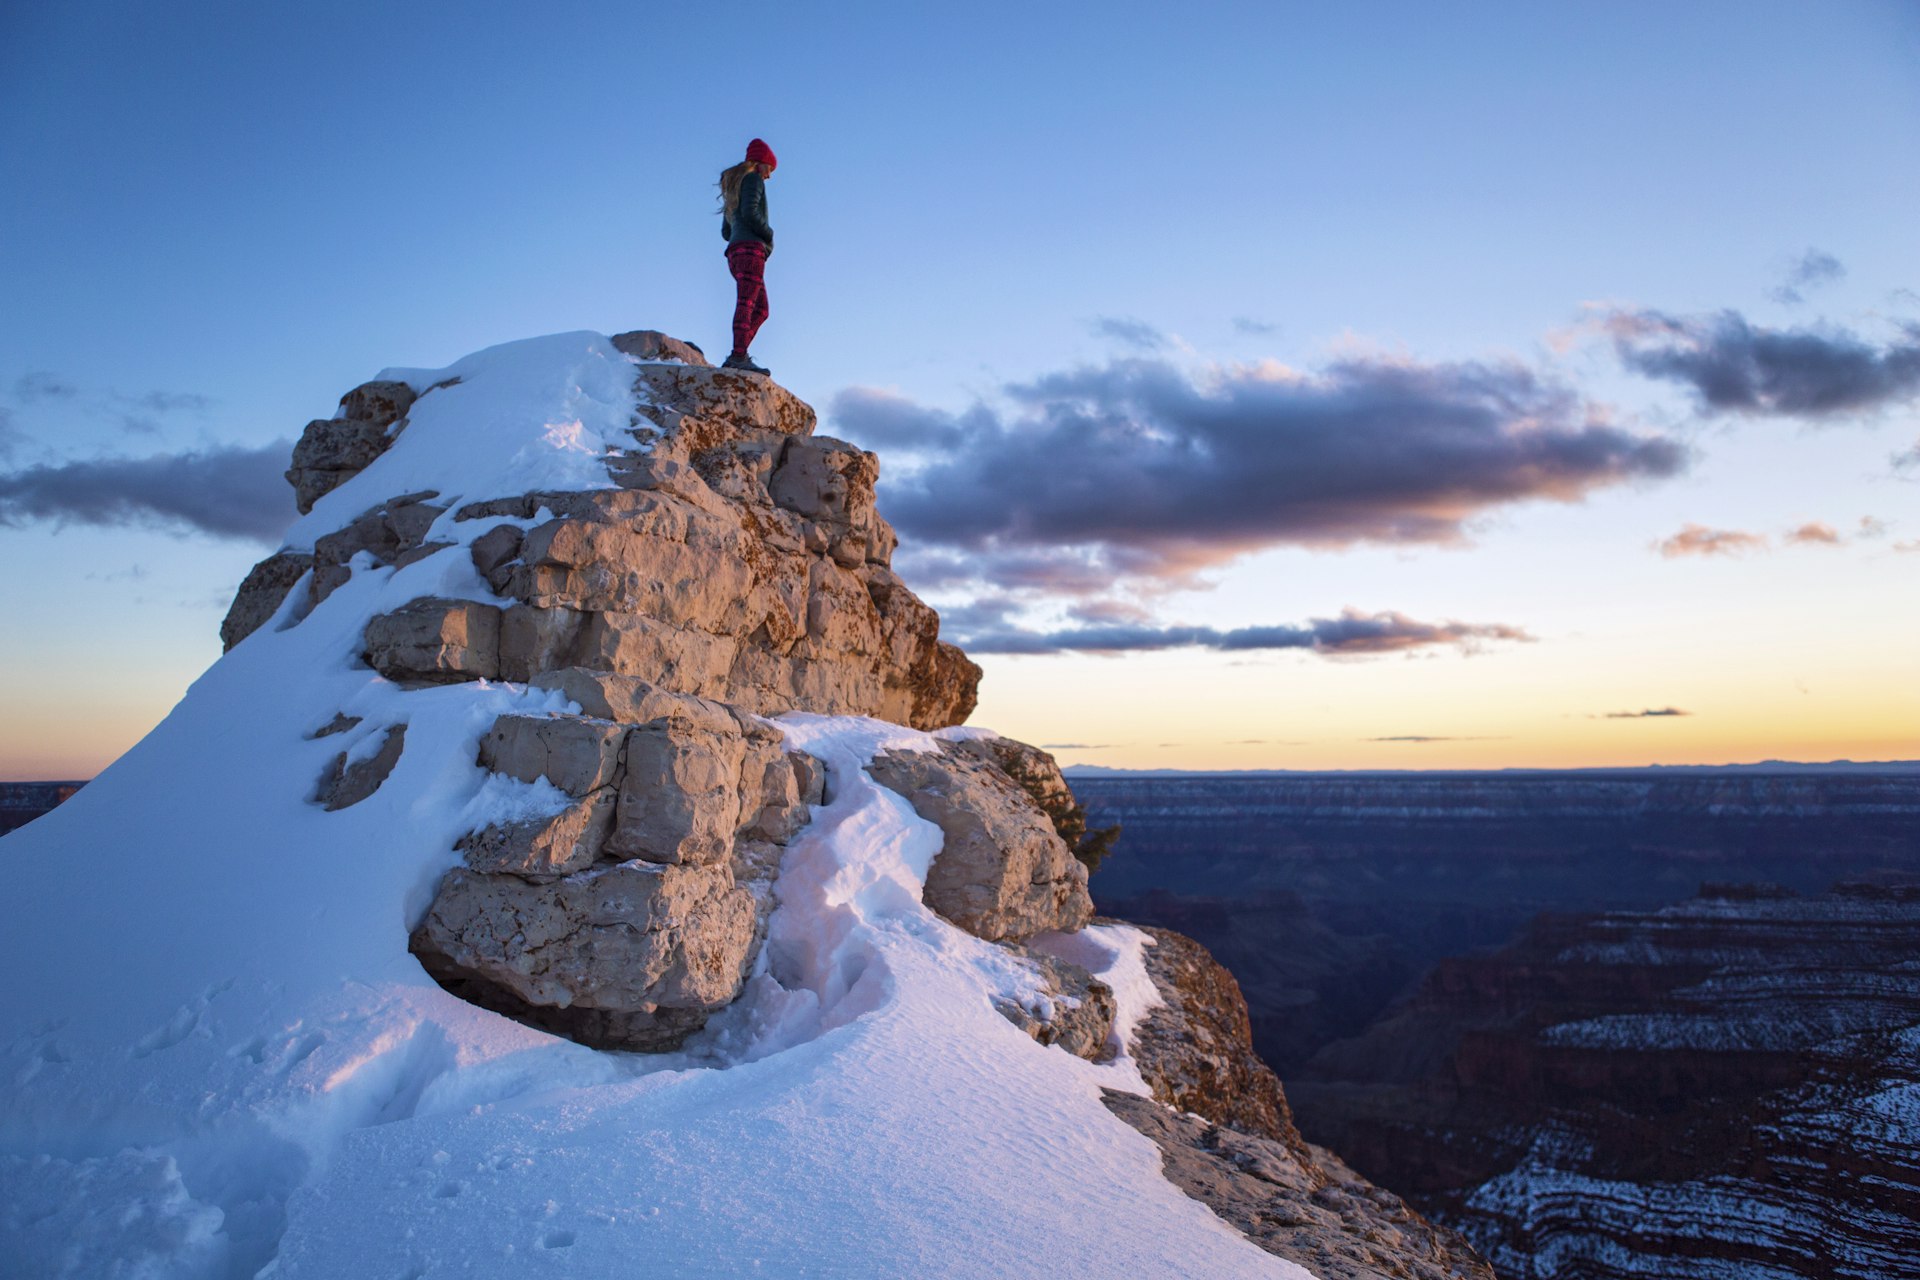 A fit, female hiker stands atop a snow-covered rocky high point while bathed in the colors of sunset at the North Rim of the Grand Canyon. The North Rim of the Grand Canyon is closed to vehicle traffic in the winter.